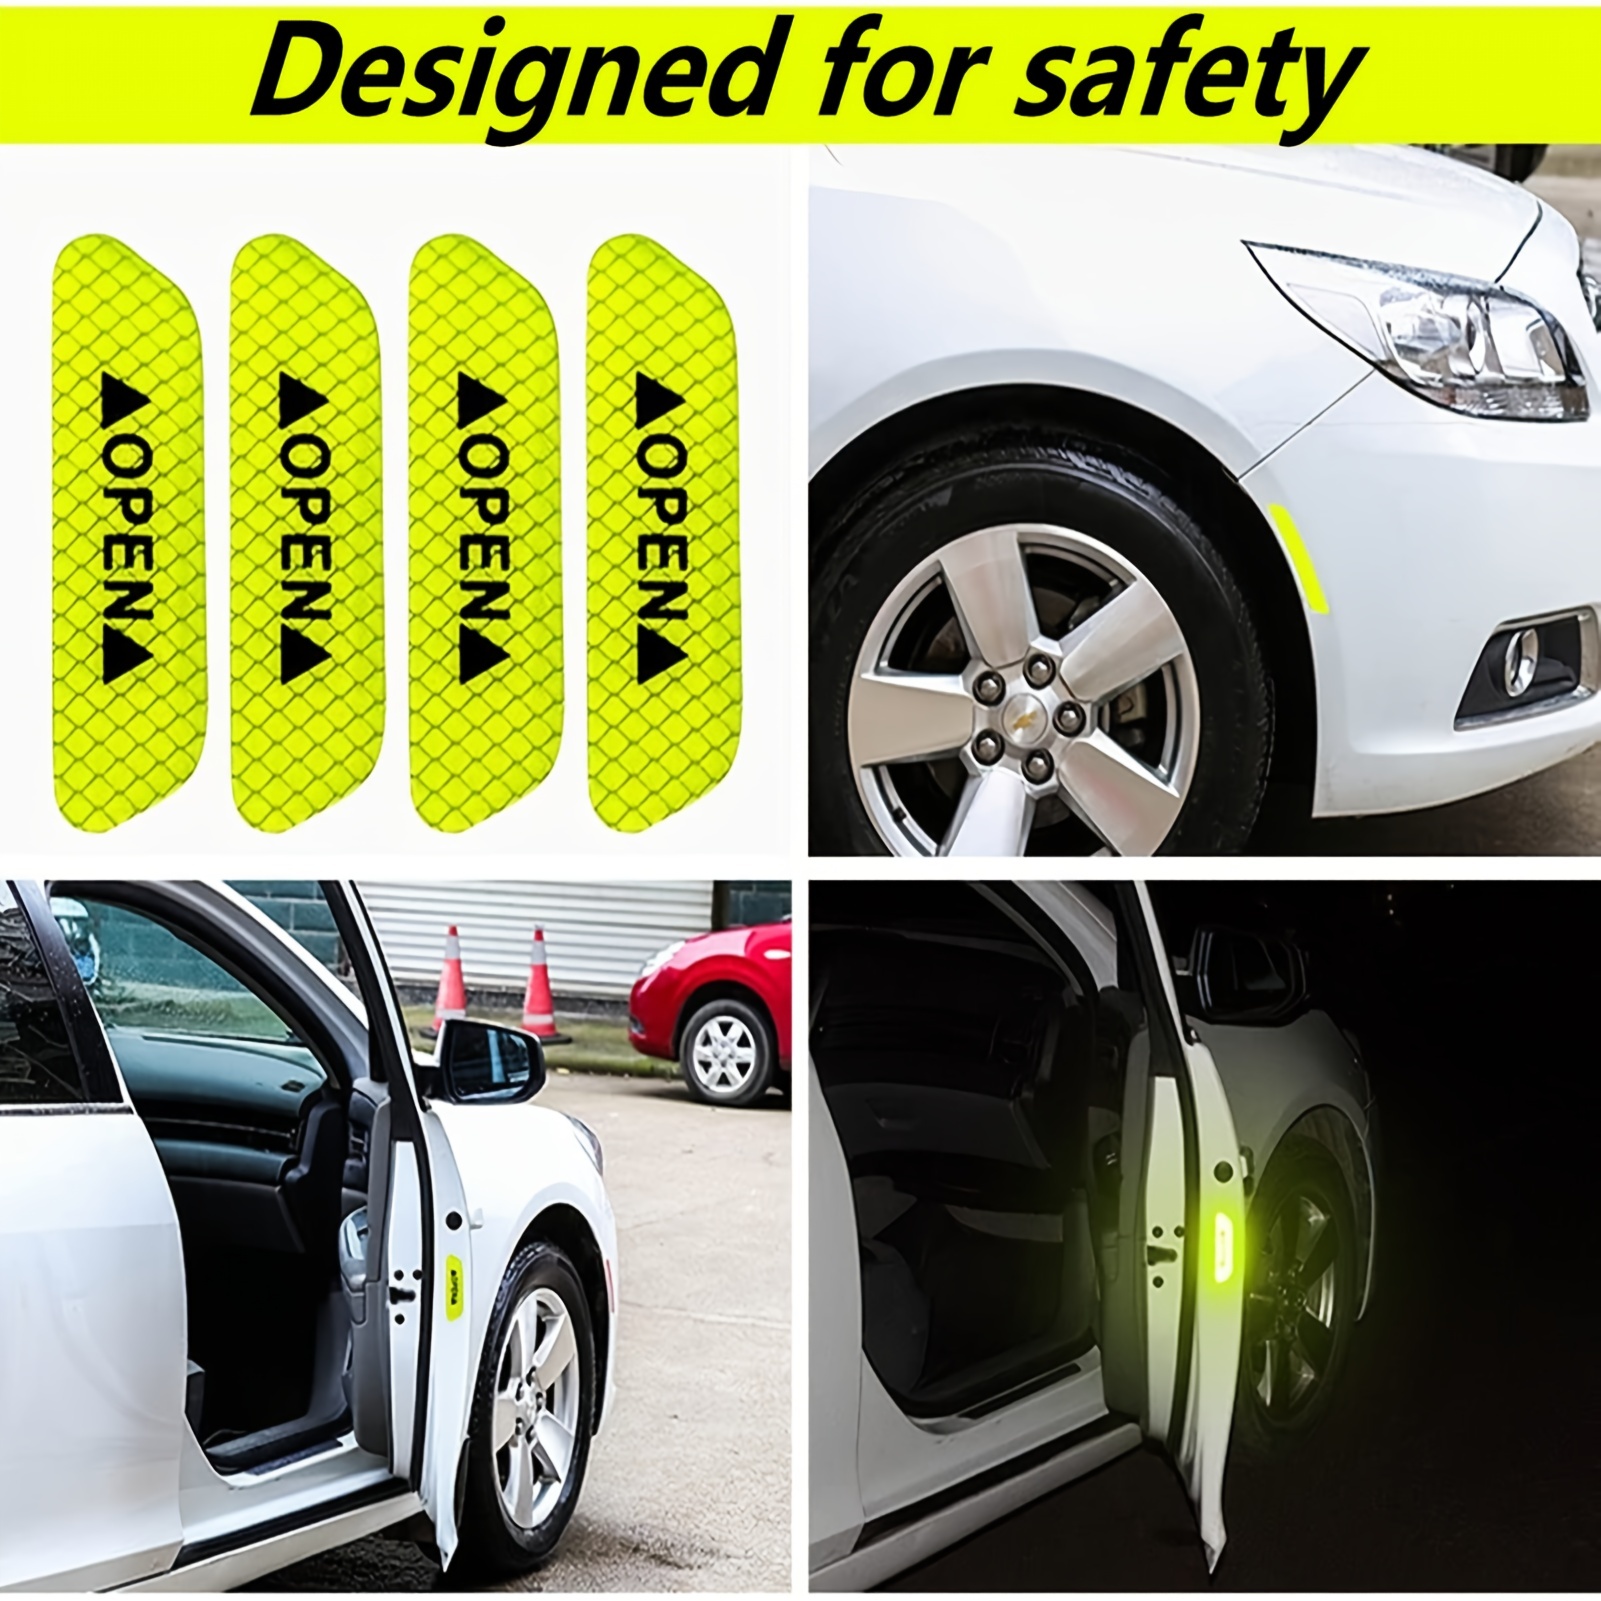 Car Reflective Stickers Night Visibility Warning Reflective Door Open Sign  Tape Adhesive - China Car Sticker, Reflective Stickers